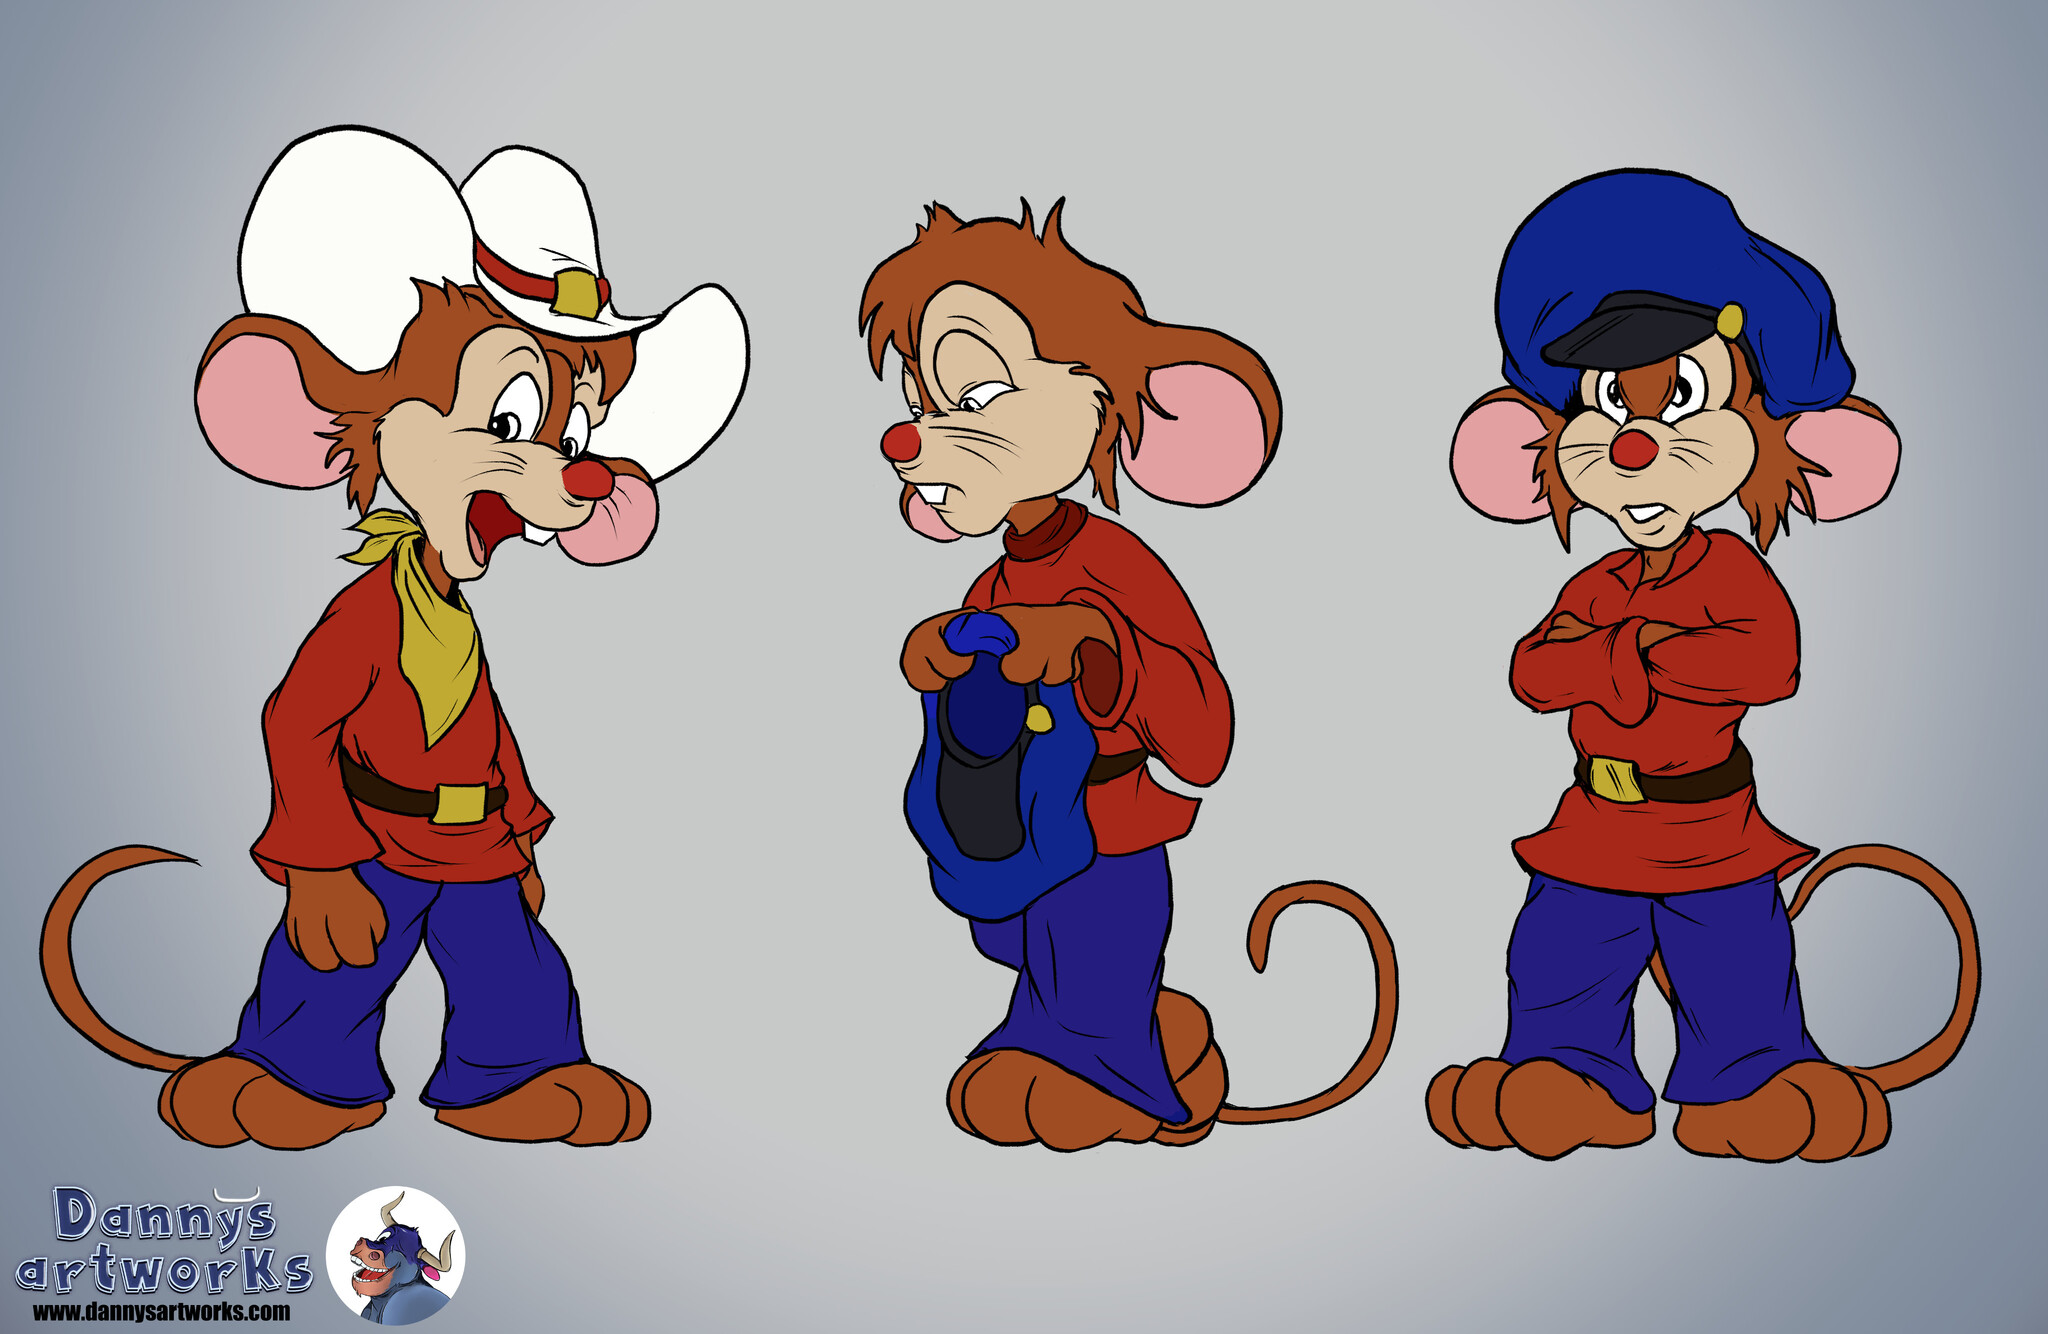 I draw cartoons 3. Fivel - Characters (edit), Artist, Walt disney company, Nostalgia, Animation, Don Bluth, Mouse, Cartoons, Fans, Drawing, Digital drawing, My